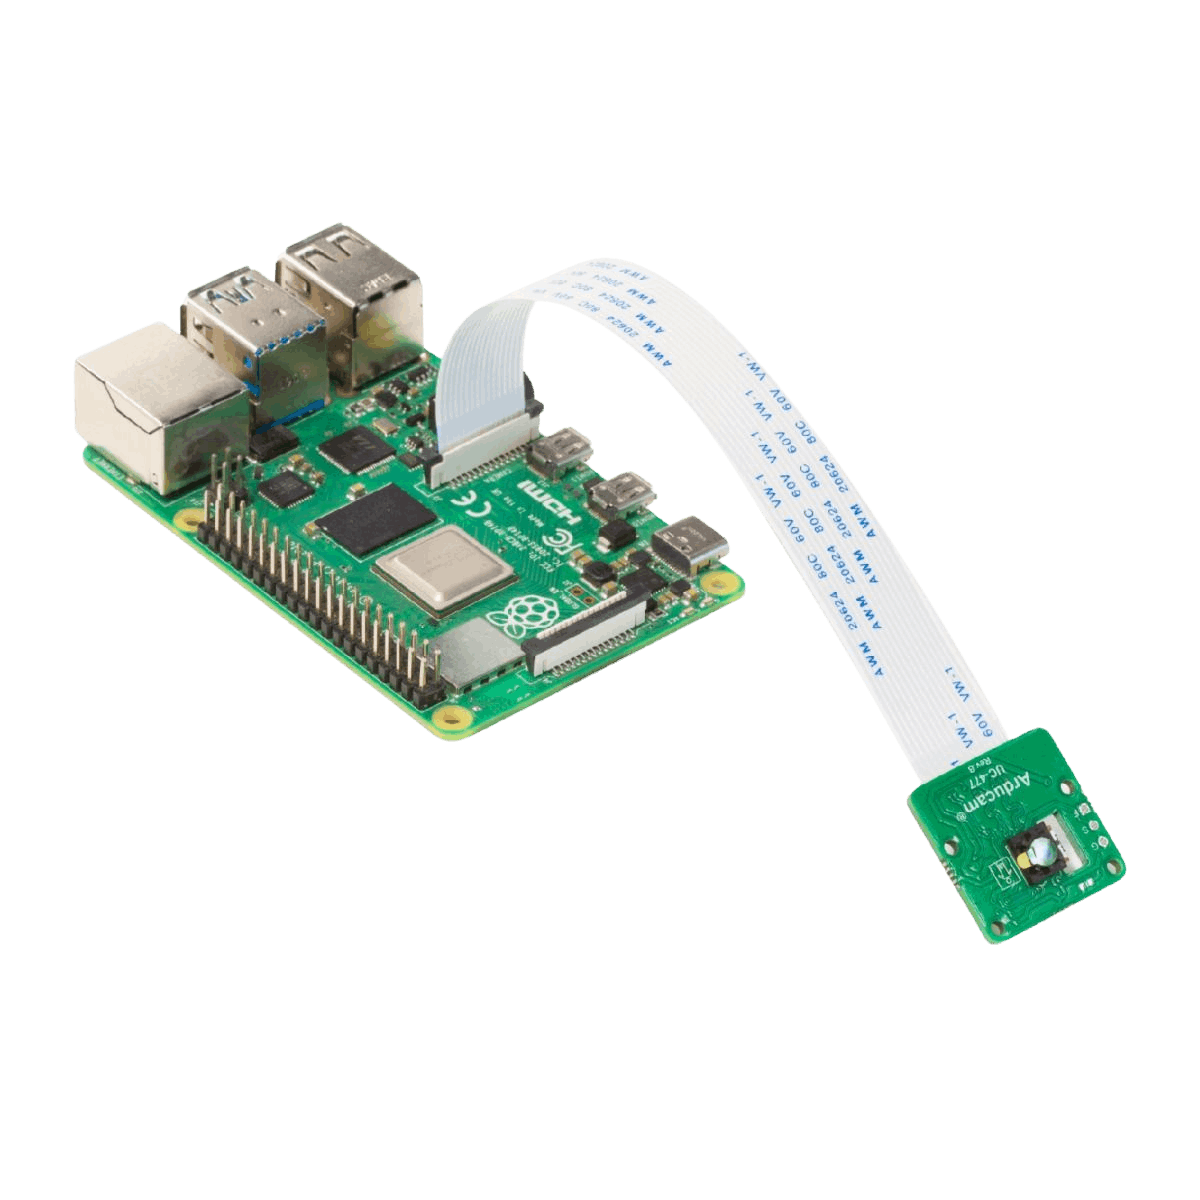 B0161 connected to raspberry pi 3/4